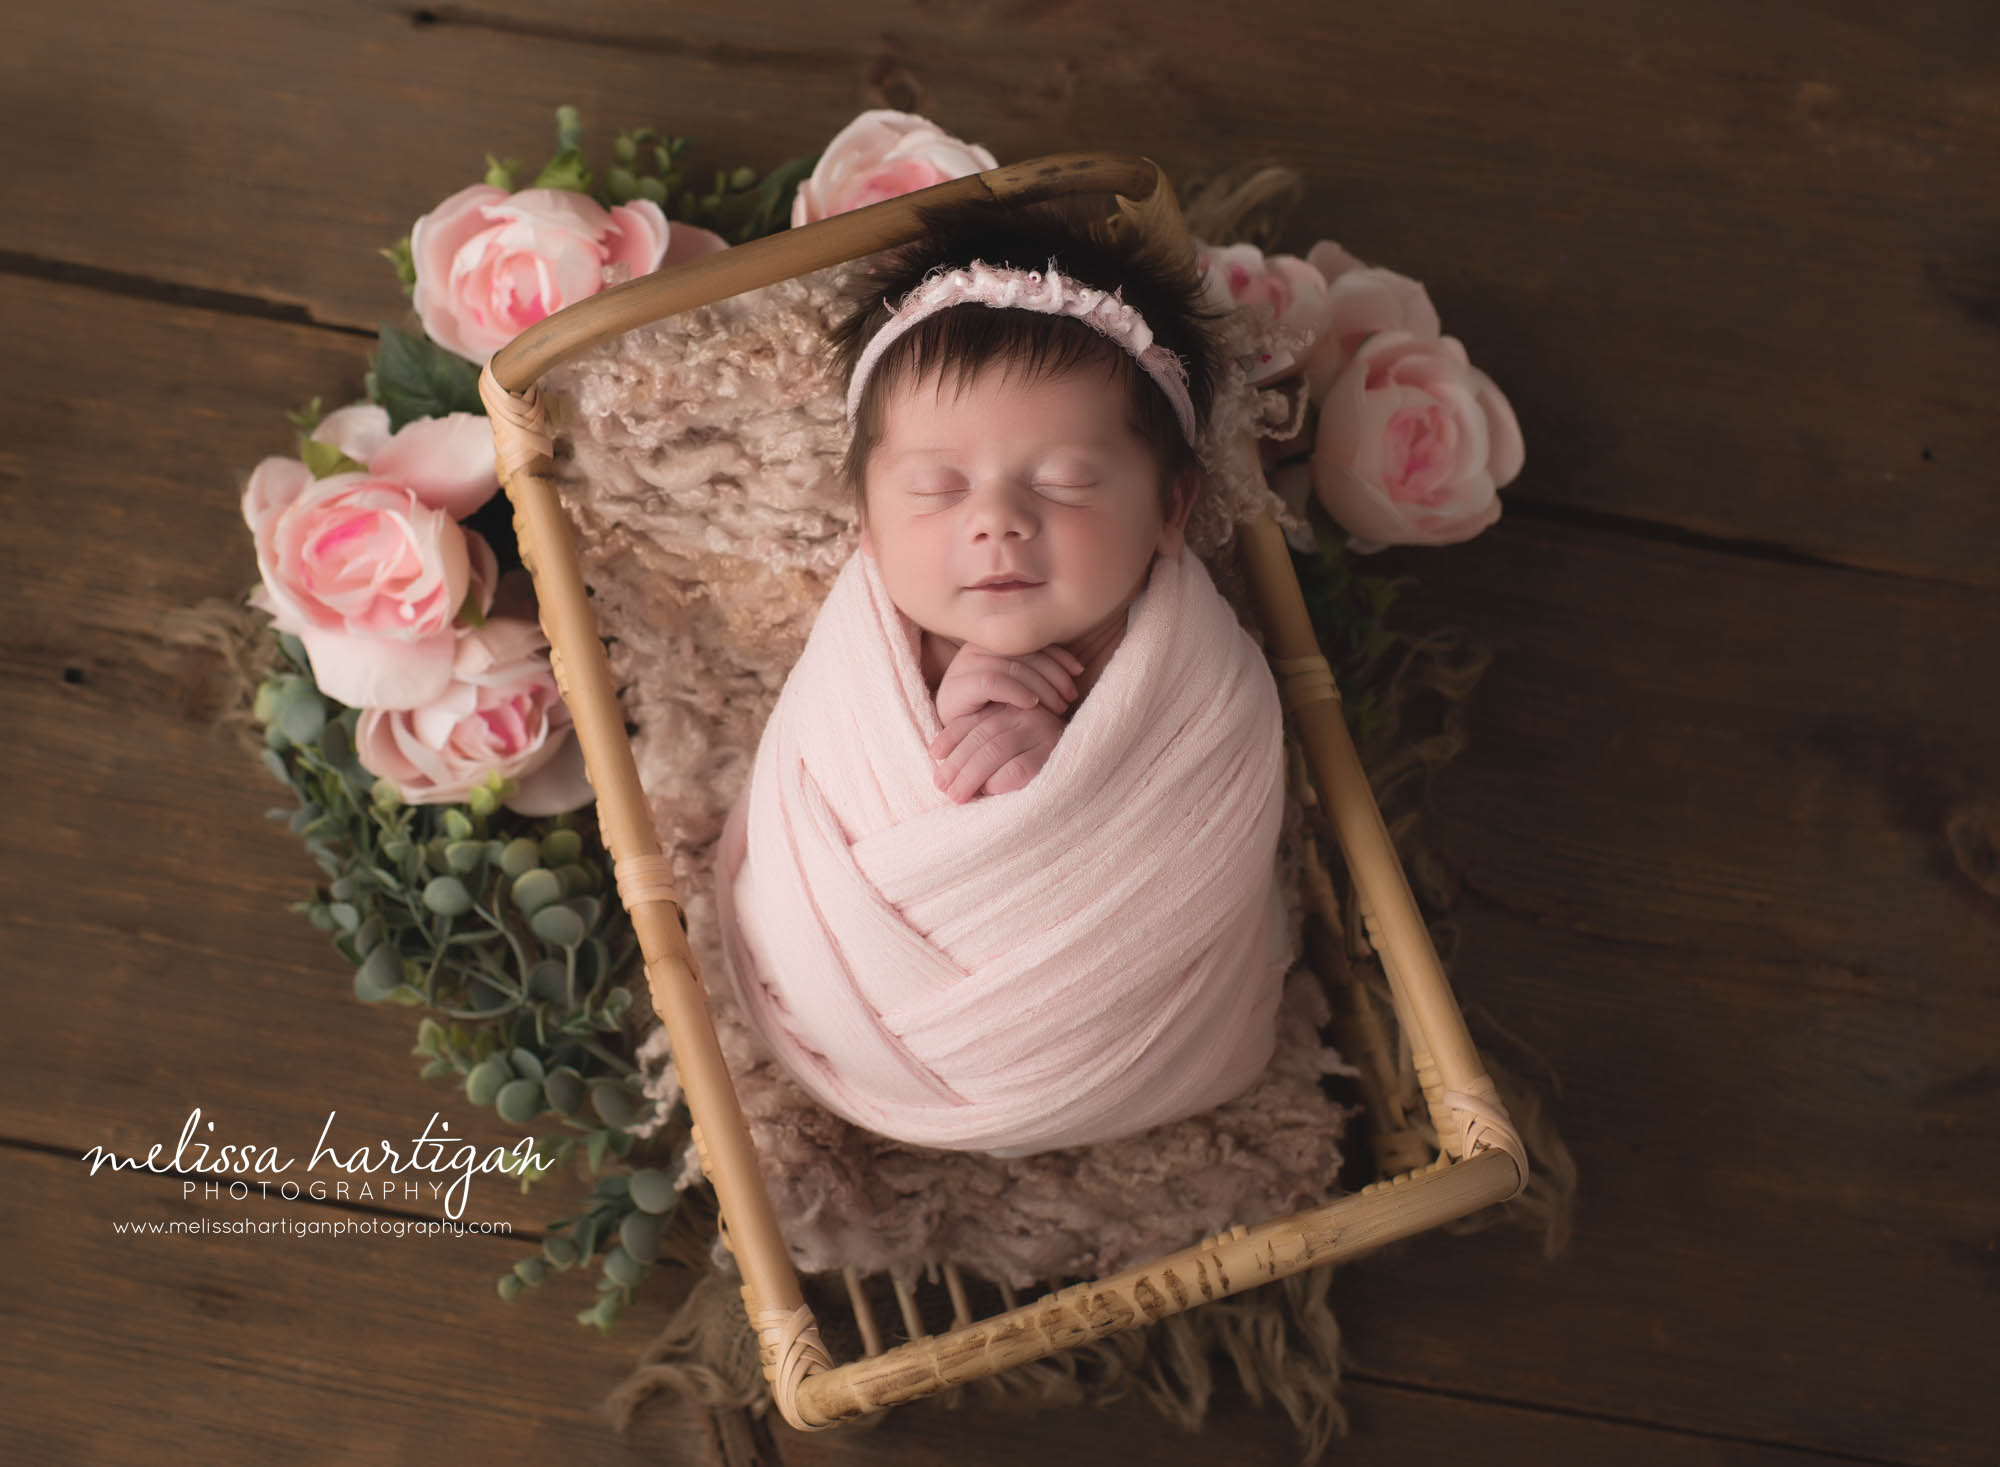 newborn baby girl posed in pink wrap posed in basket with pink layers and floral elements tolland county Newborn photography